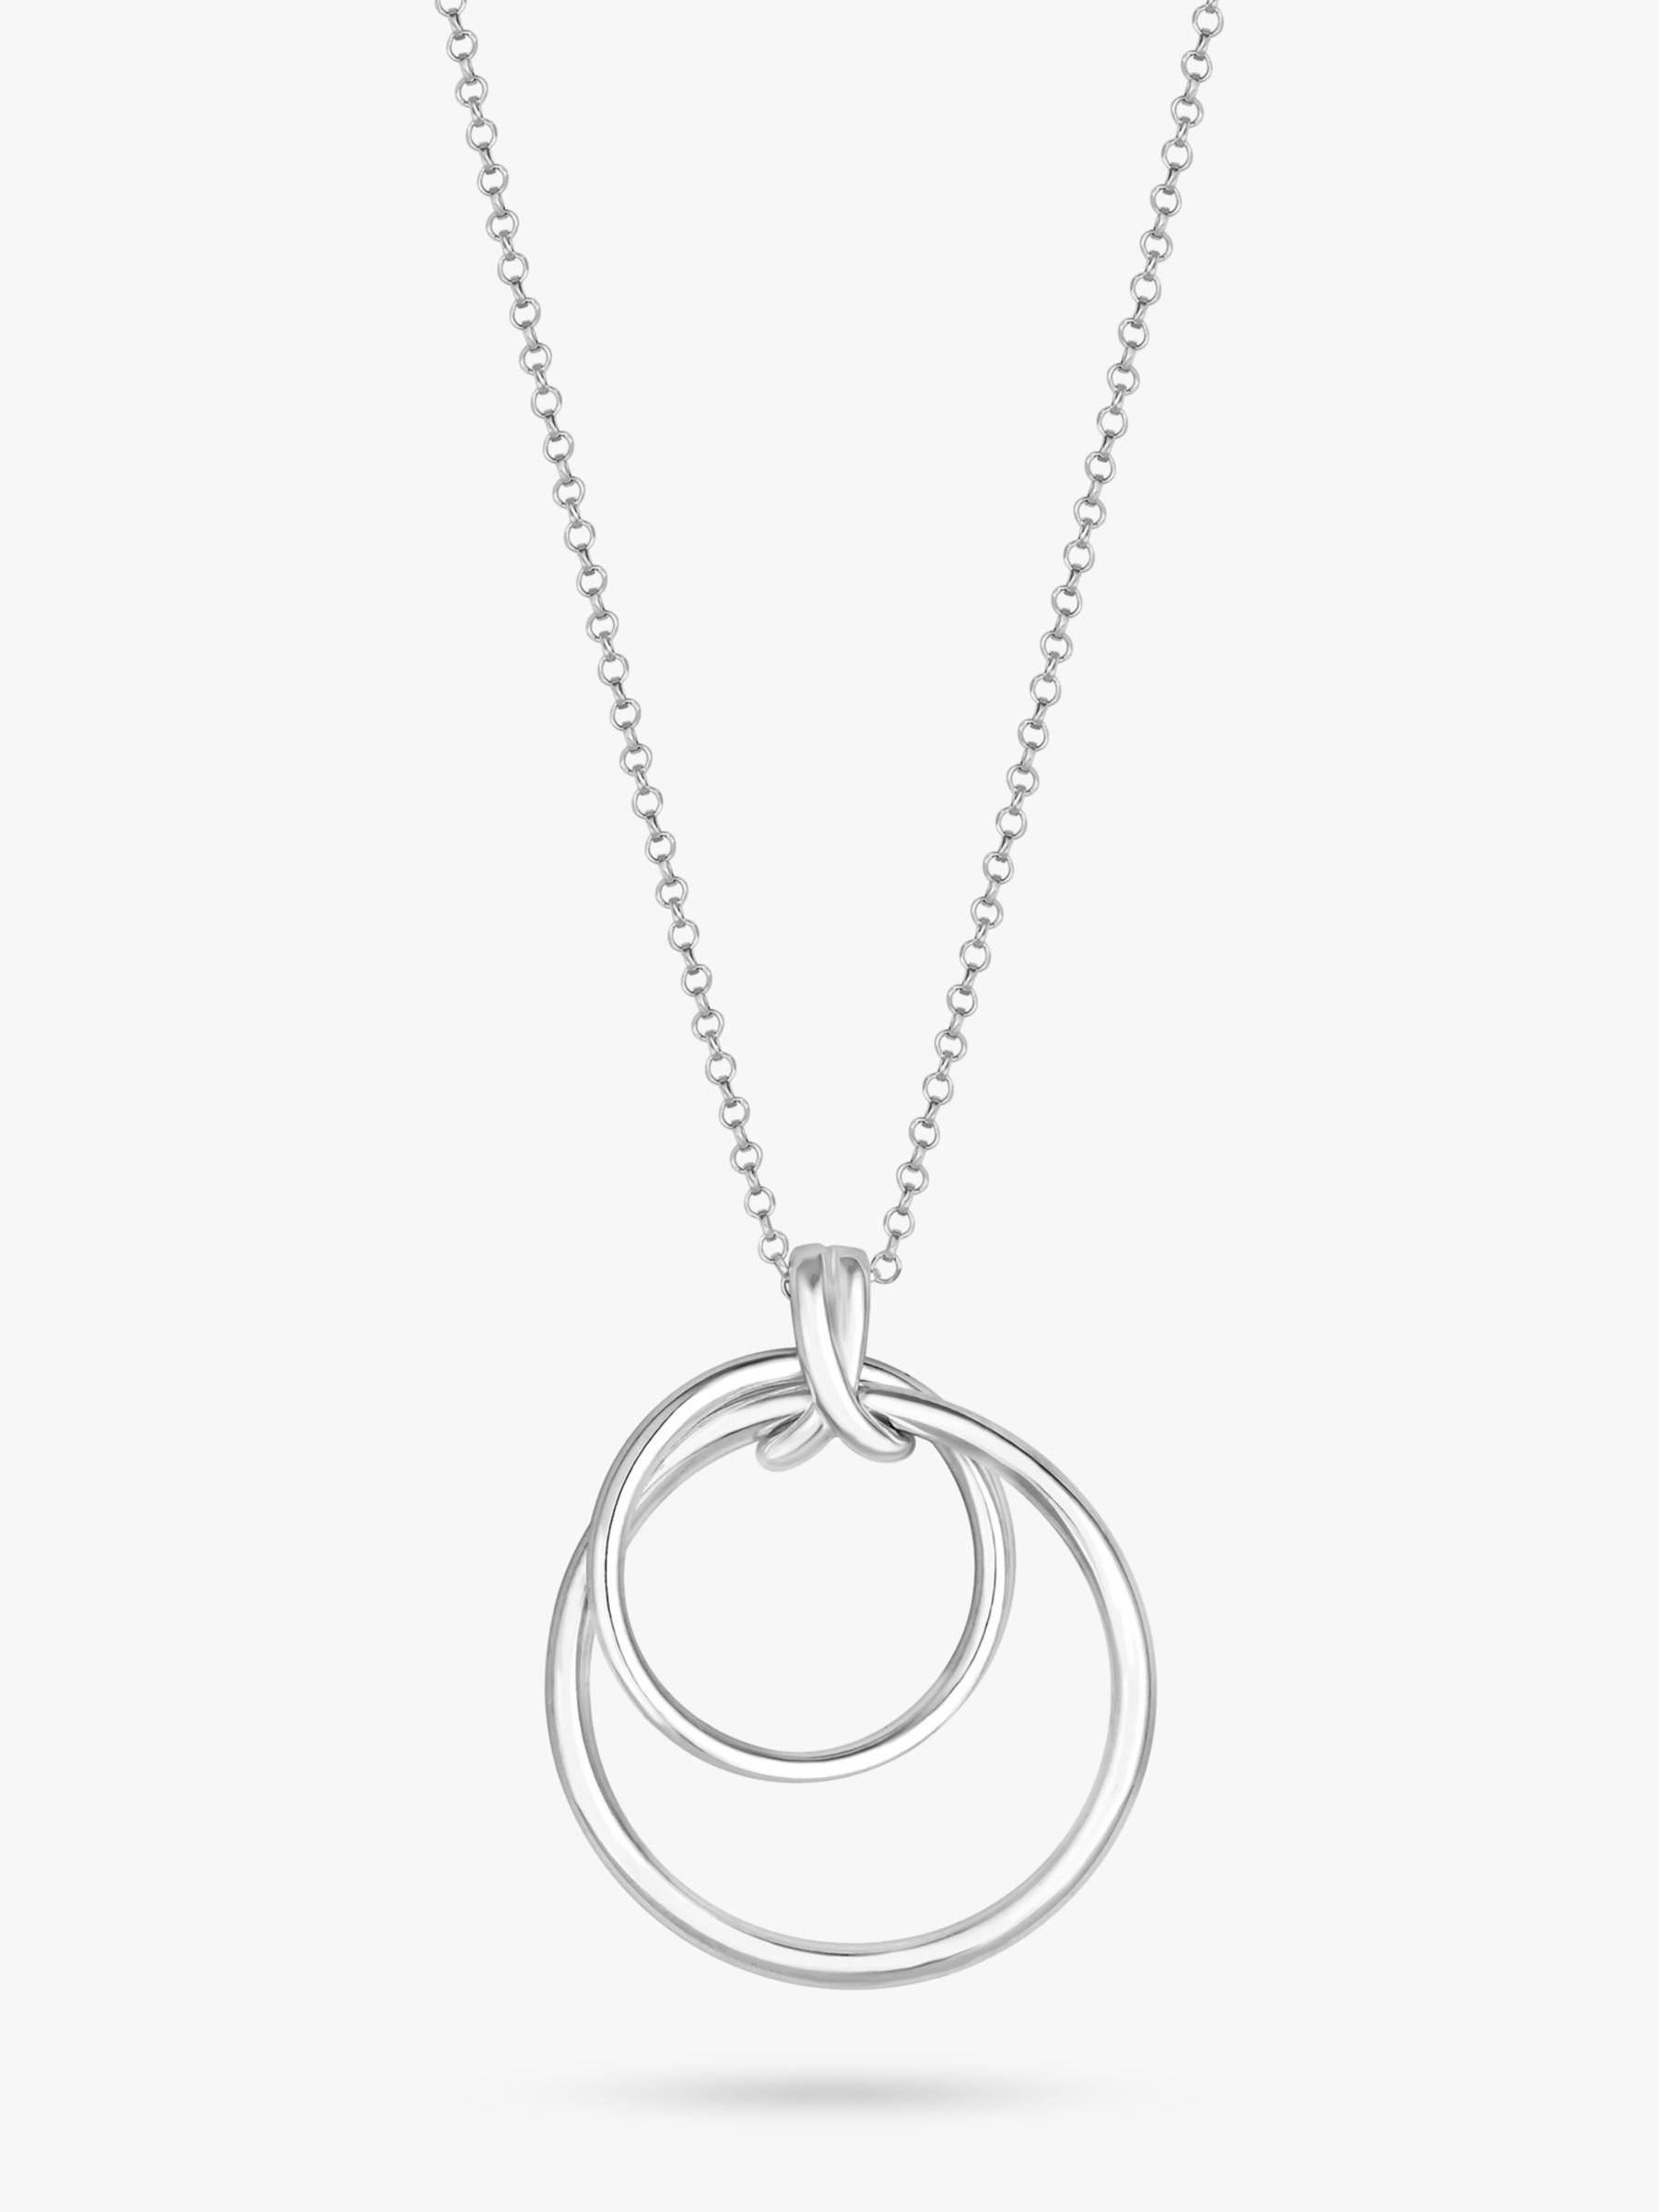 Simply Silver Round Double Pendant Necklace, Silver